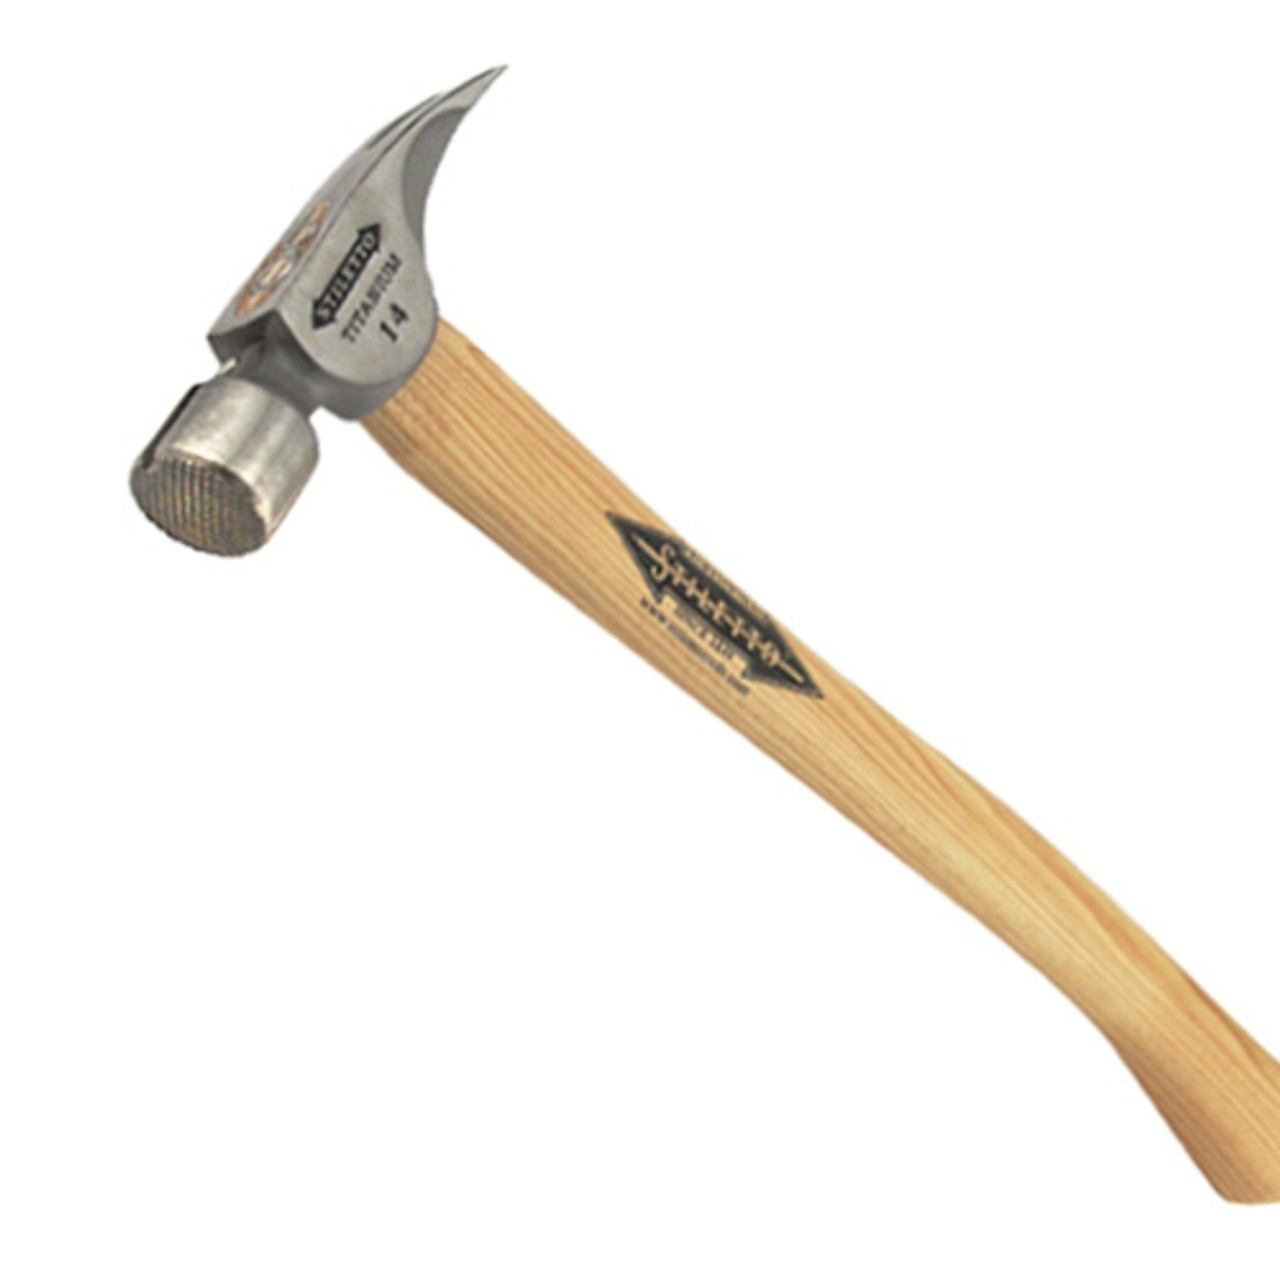 Hickory Replacement Handle for 24 oz. Brick Hammer